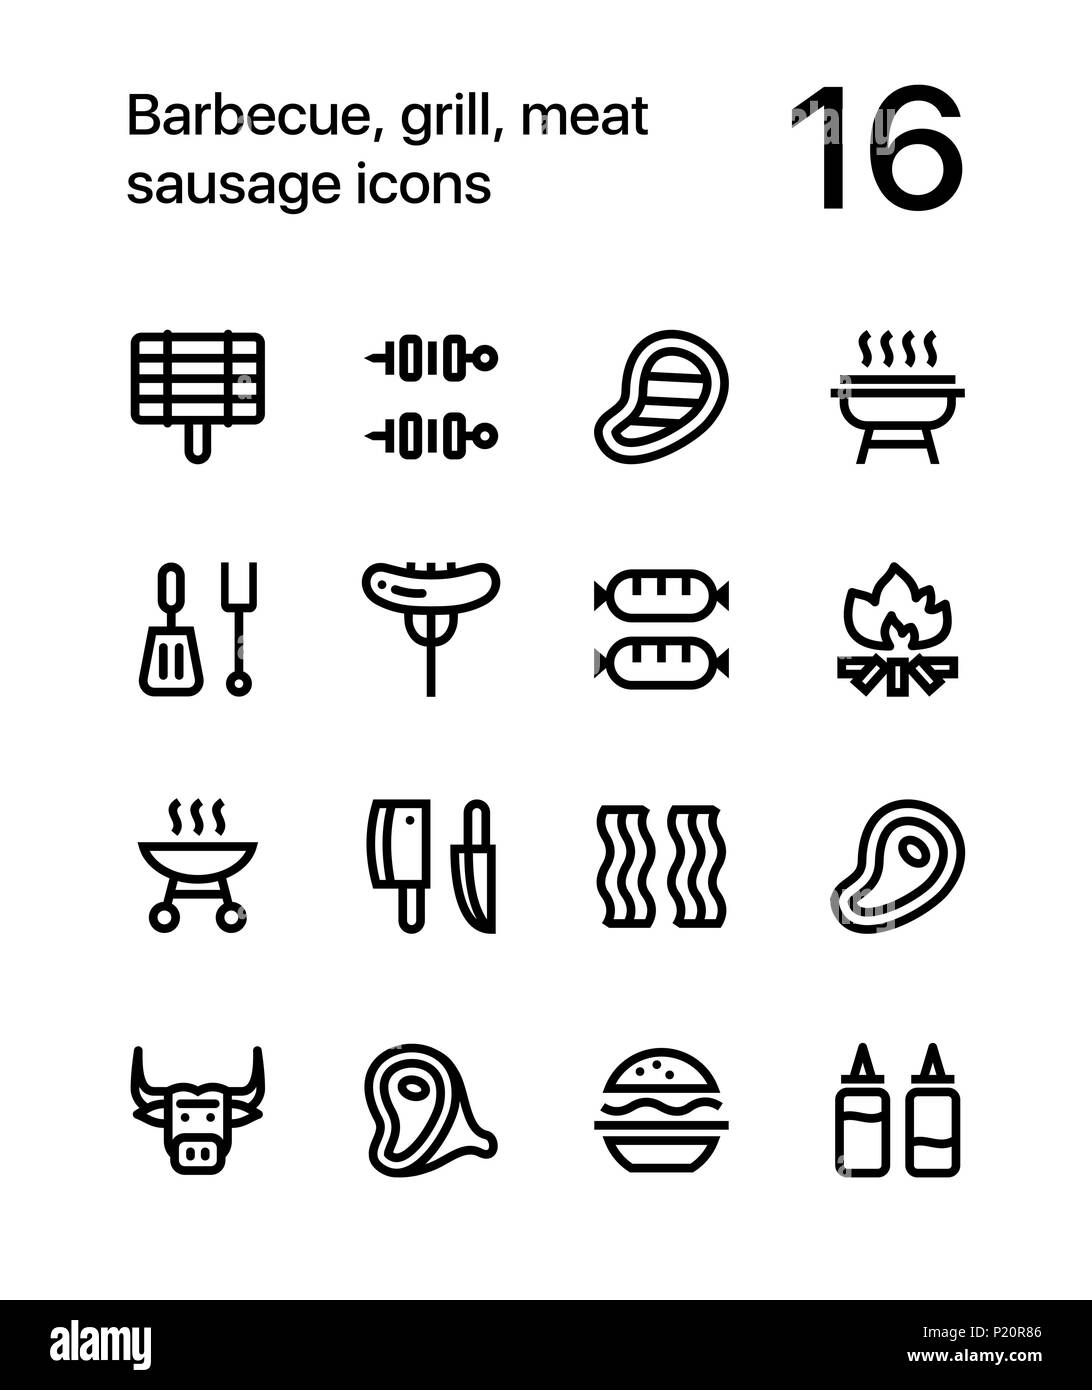 Barbecue, grill, meat, sausage icons for web and mobile design pack 1 Stock Vector